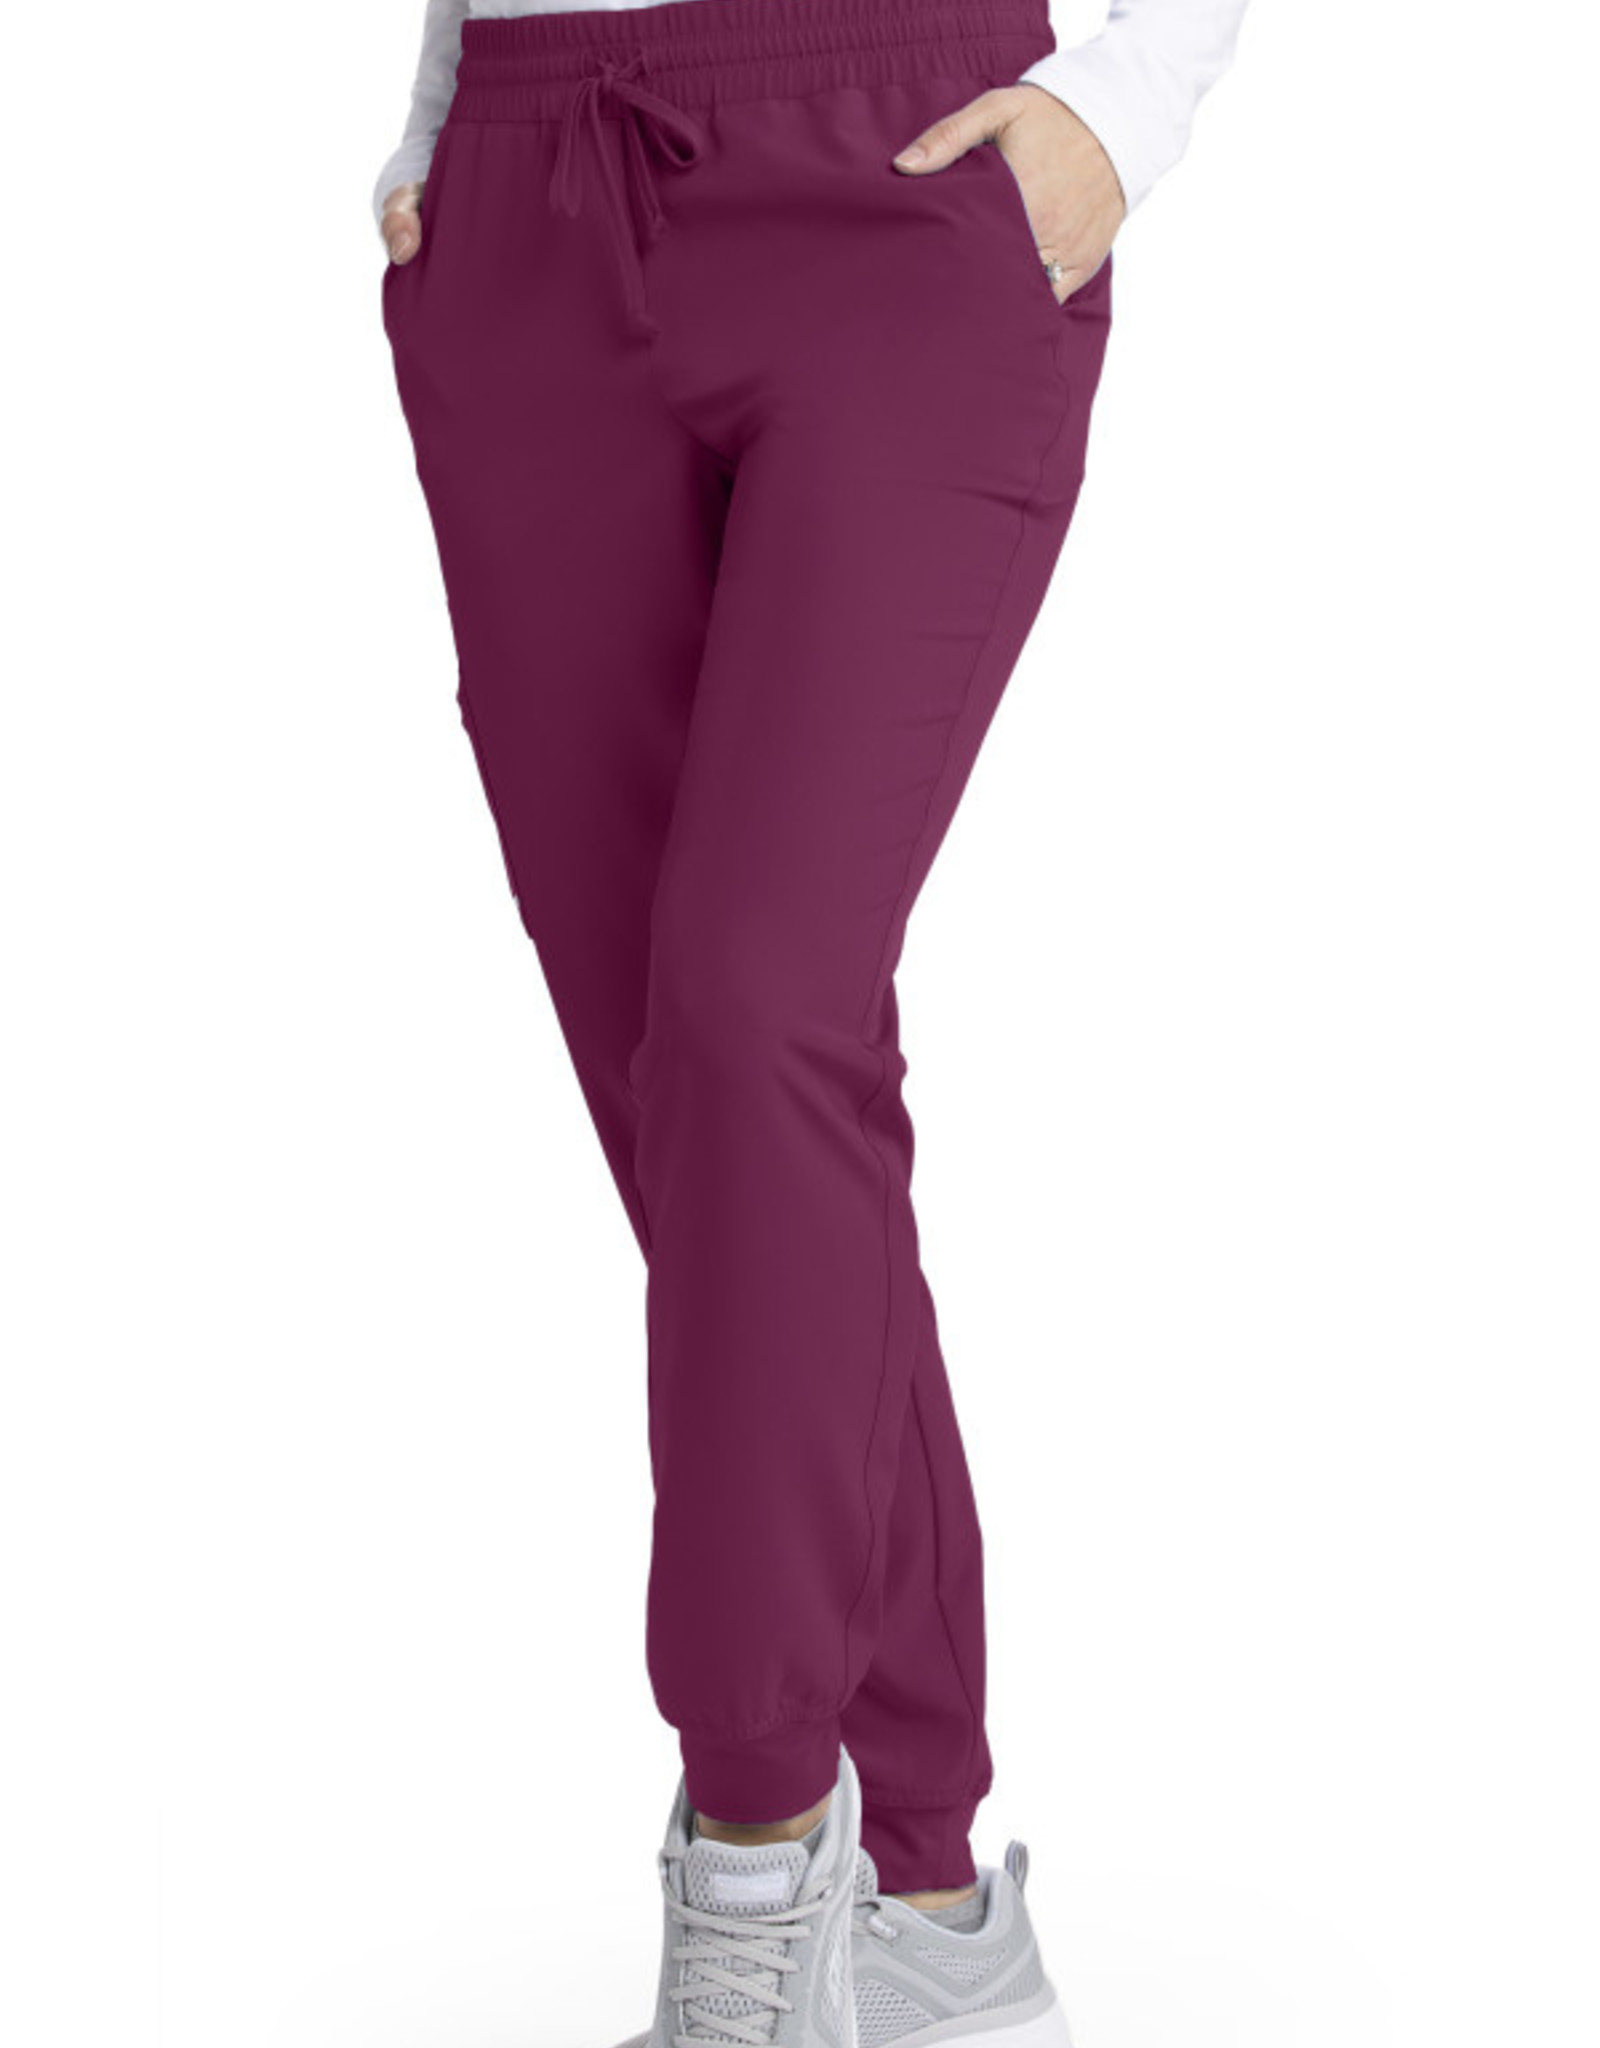 Skechers Theory 4-Pocket Womens Stretch Fabric Moisture Wicking Scrub Pants  - JCPenney